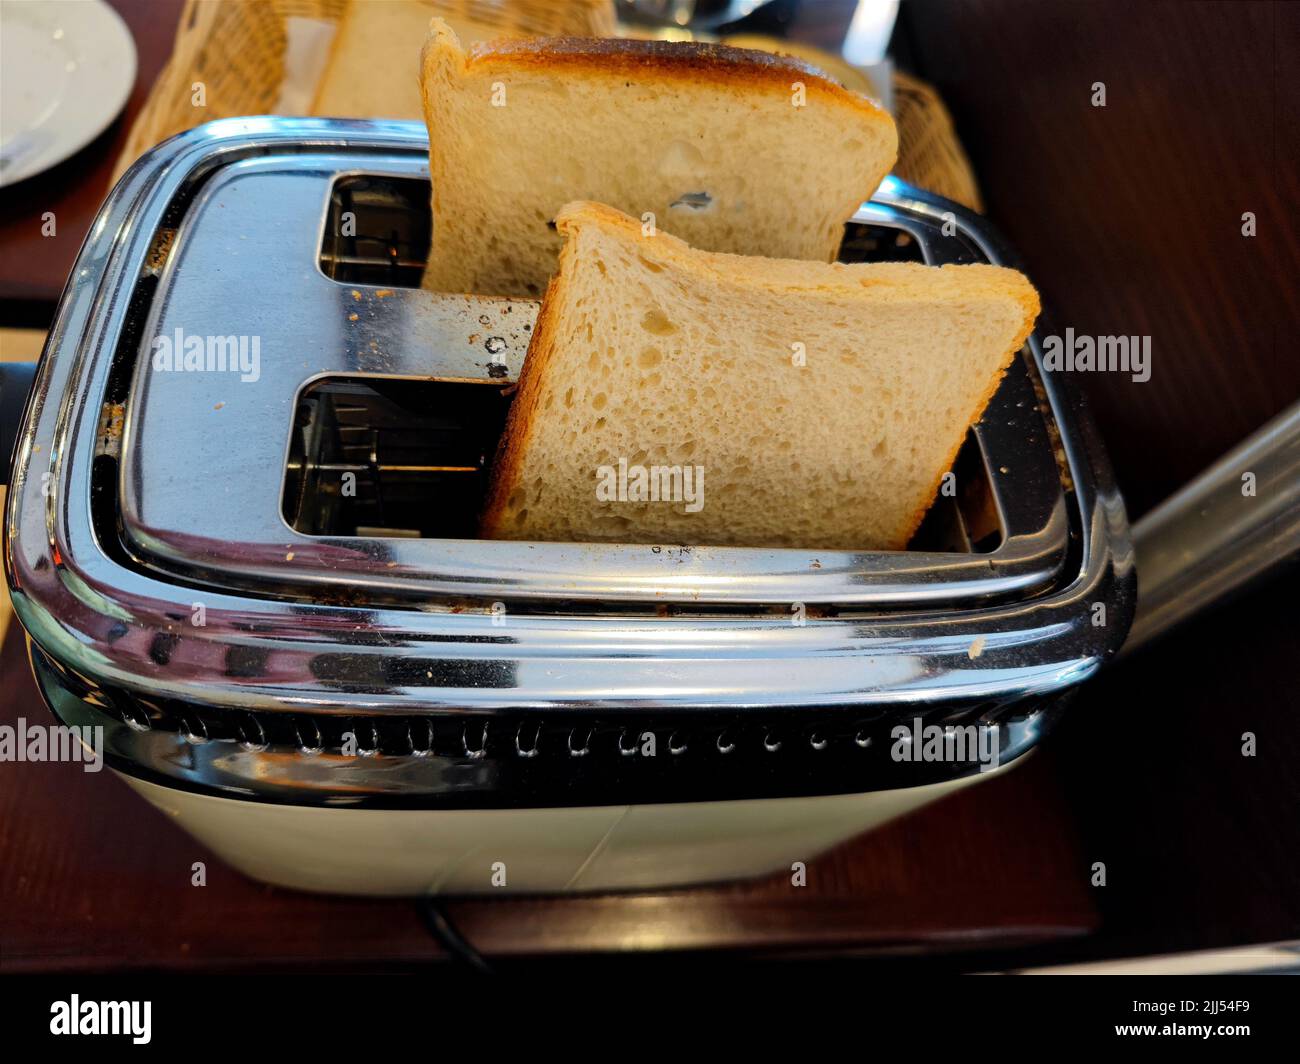 Delicious fresh white bread in a toaster about to be toasted during breakfast Stock Photo